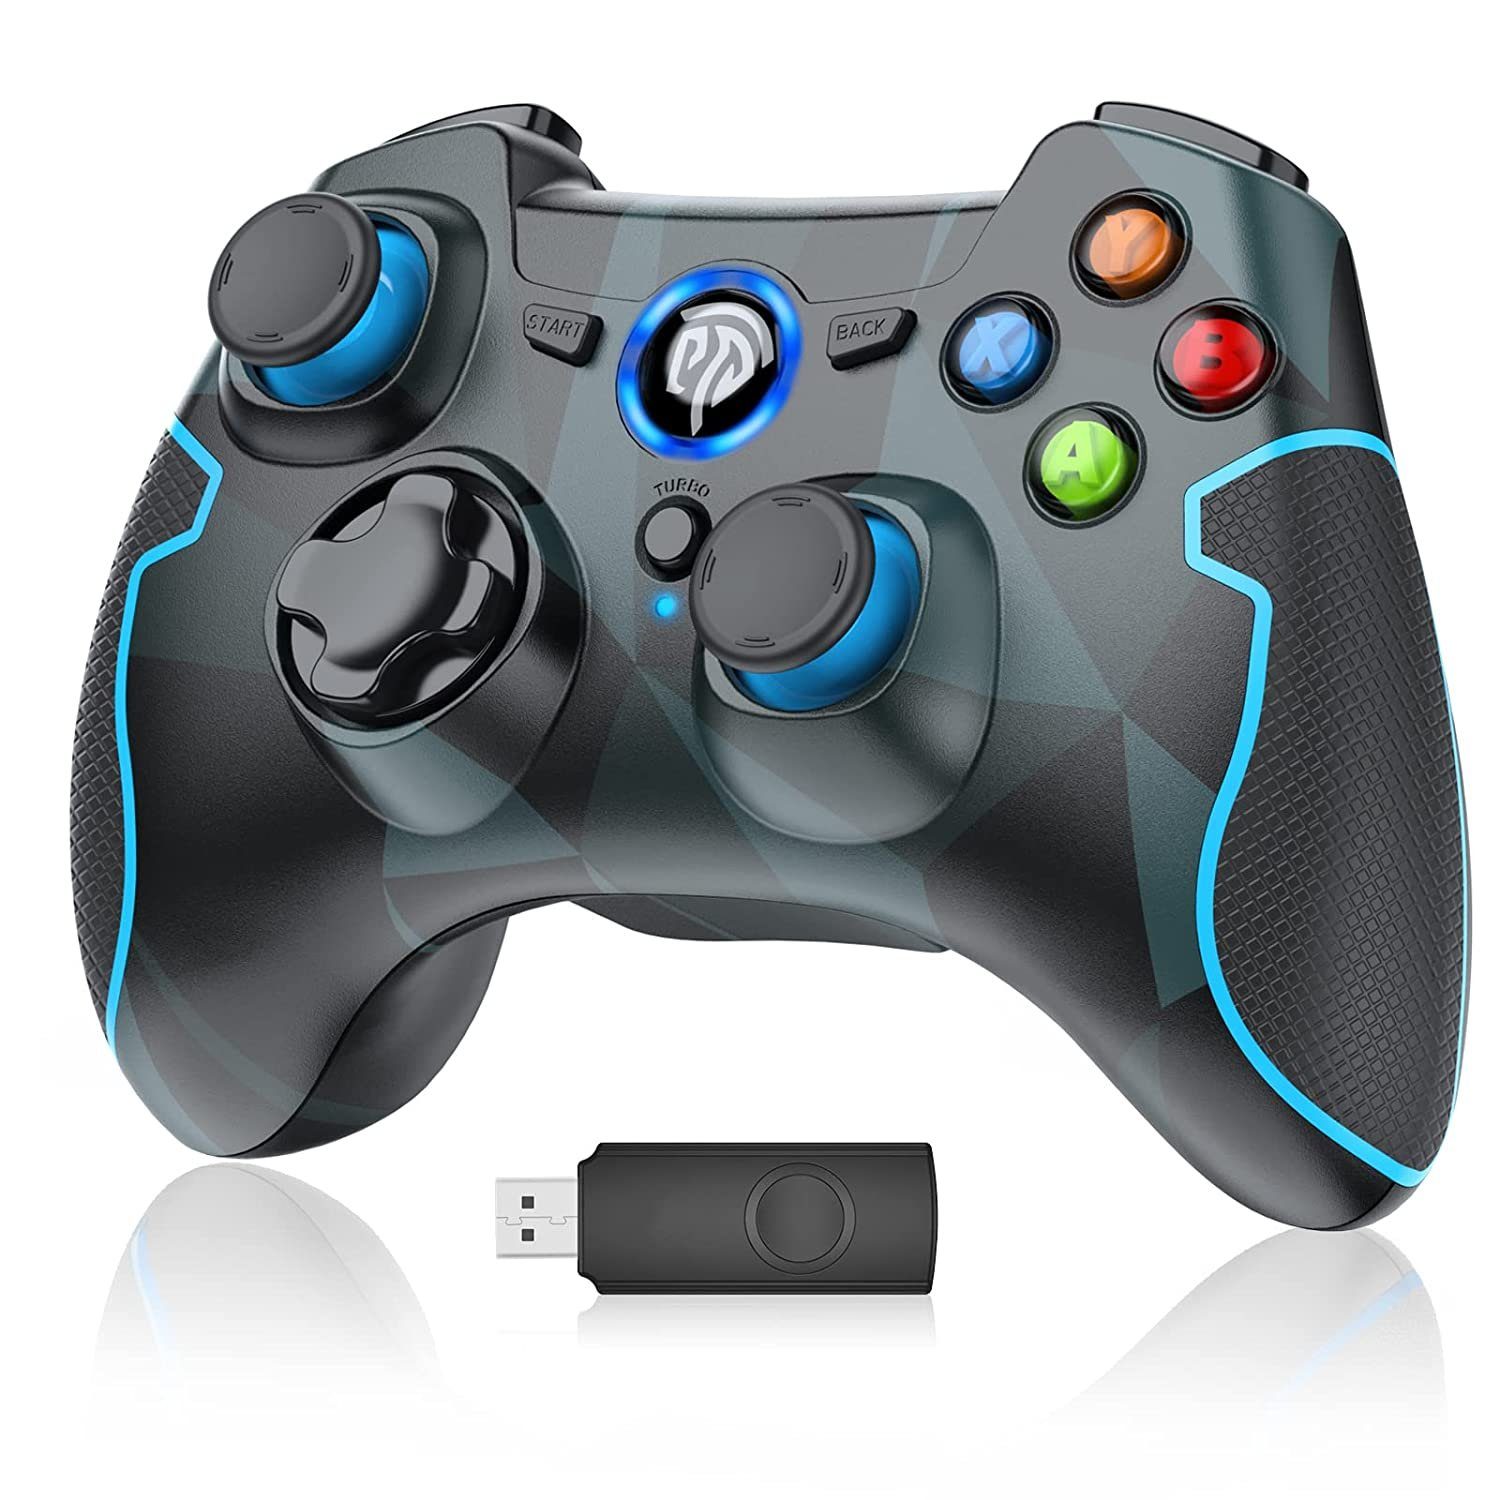 EasySMX 67-0013 PC Controller, 2.4G Wireless Gamepad, PS3 Gaming Controller  Controller (Dual Vibration, 8 Stunden Spielzeit für PS3 / PC /  Android-TV-Box)